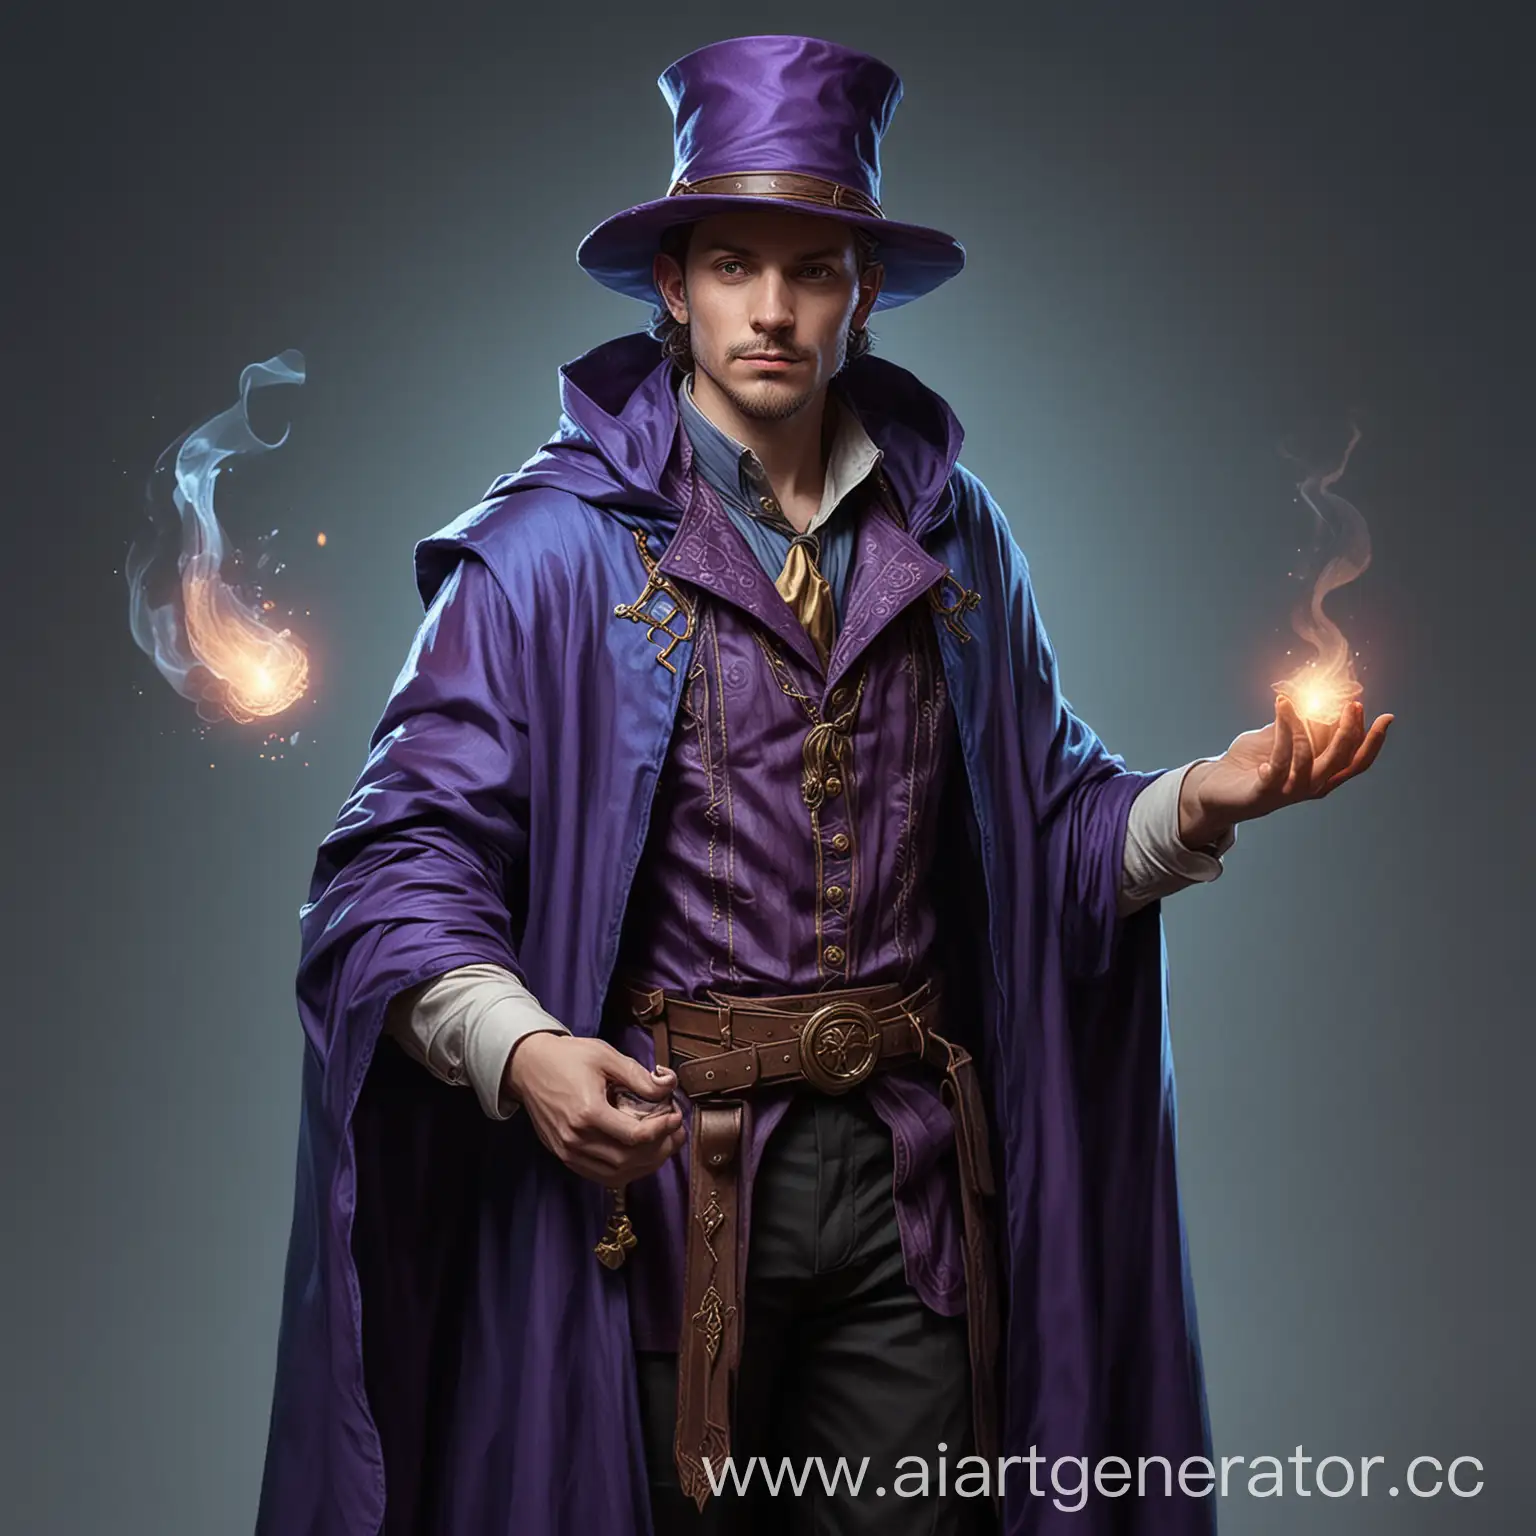 Male-Magician-in-Purple-Hat-and-Blue-Cloak-Casting-Spell